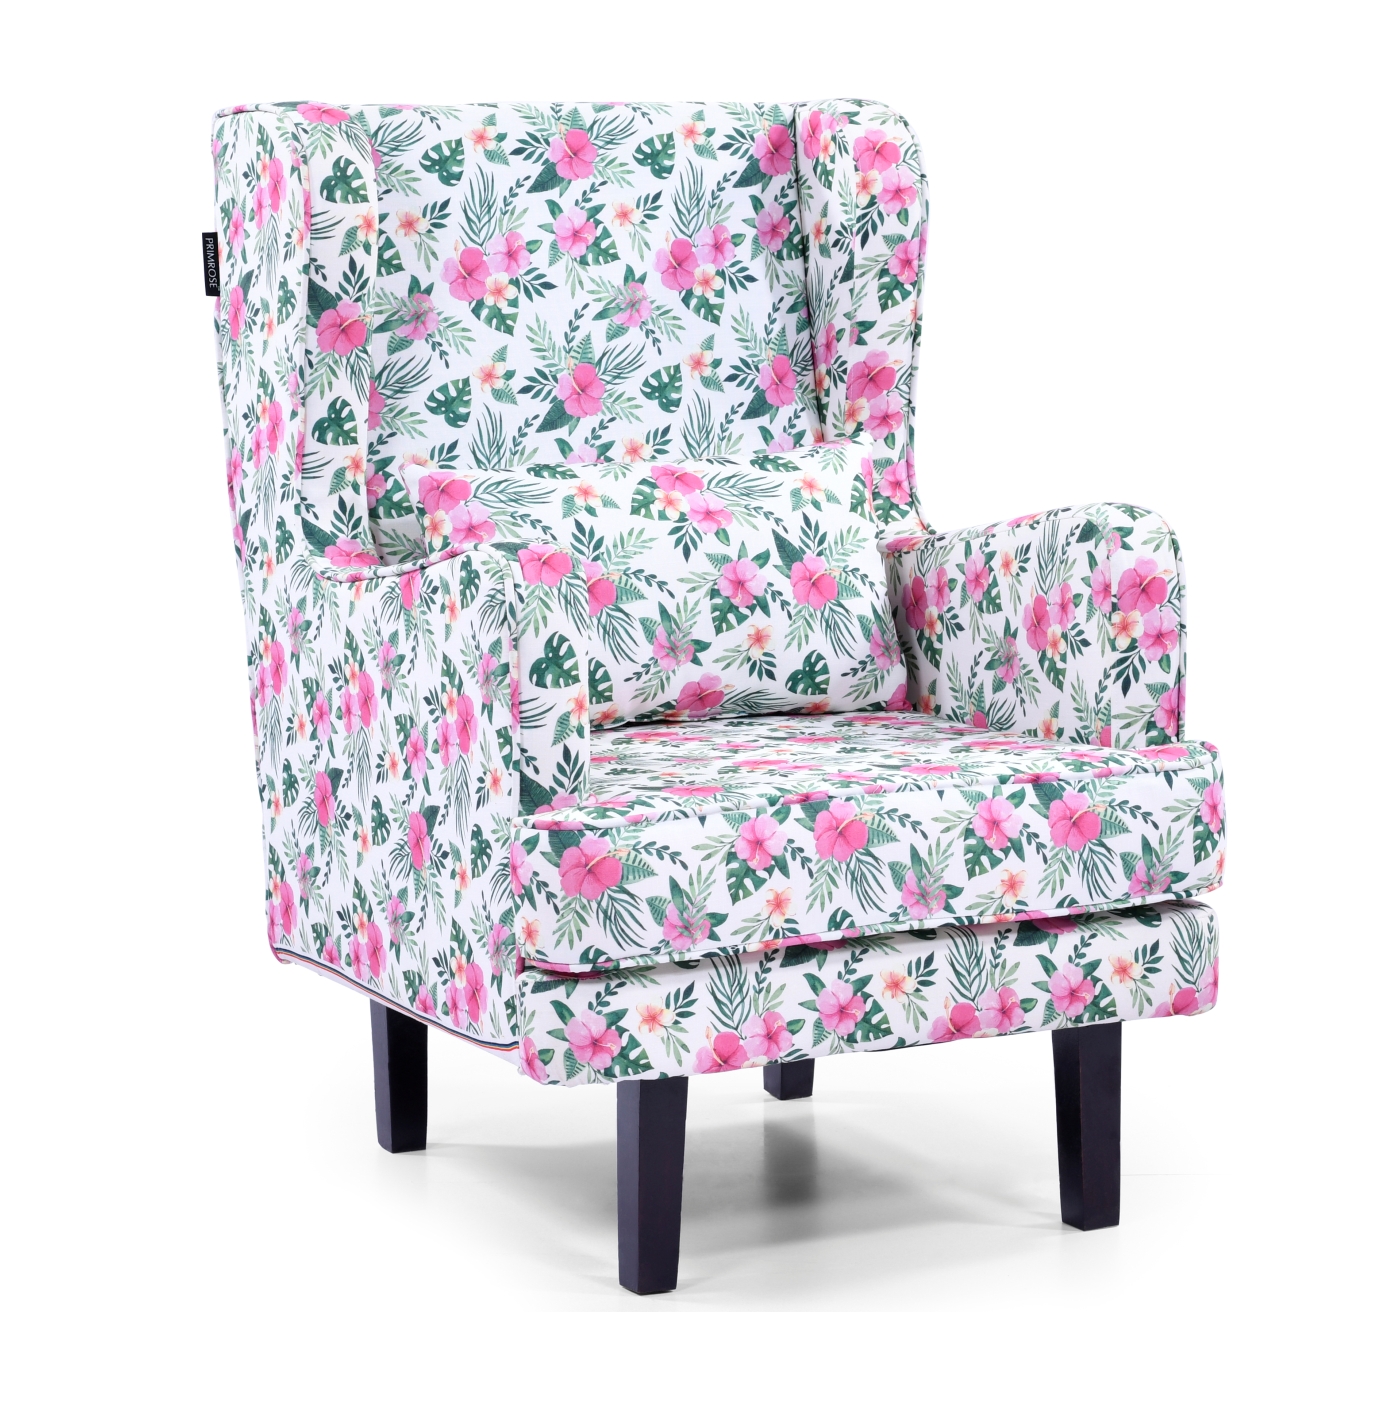 PRIMROSE Hibiscus Floral Digital Printed Faux Linen Fabric High Back Wing Chair - Pink, Green  